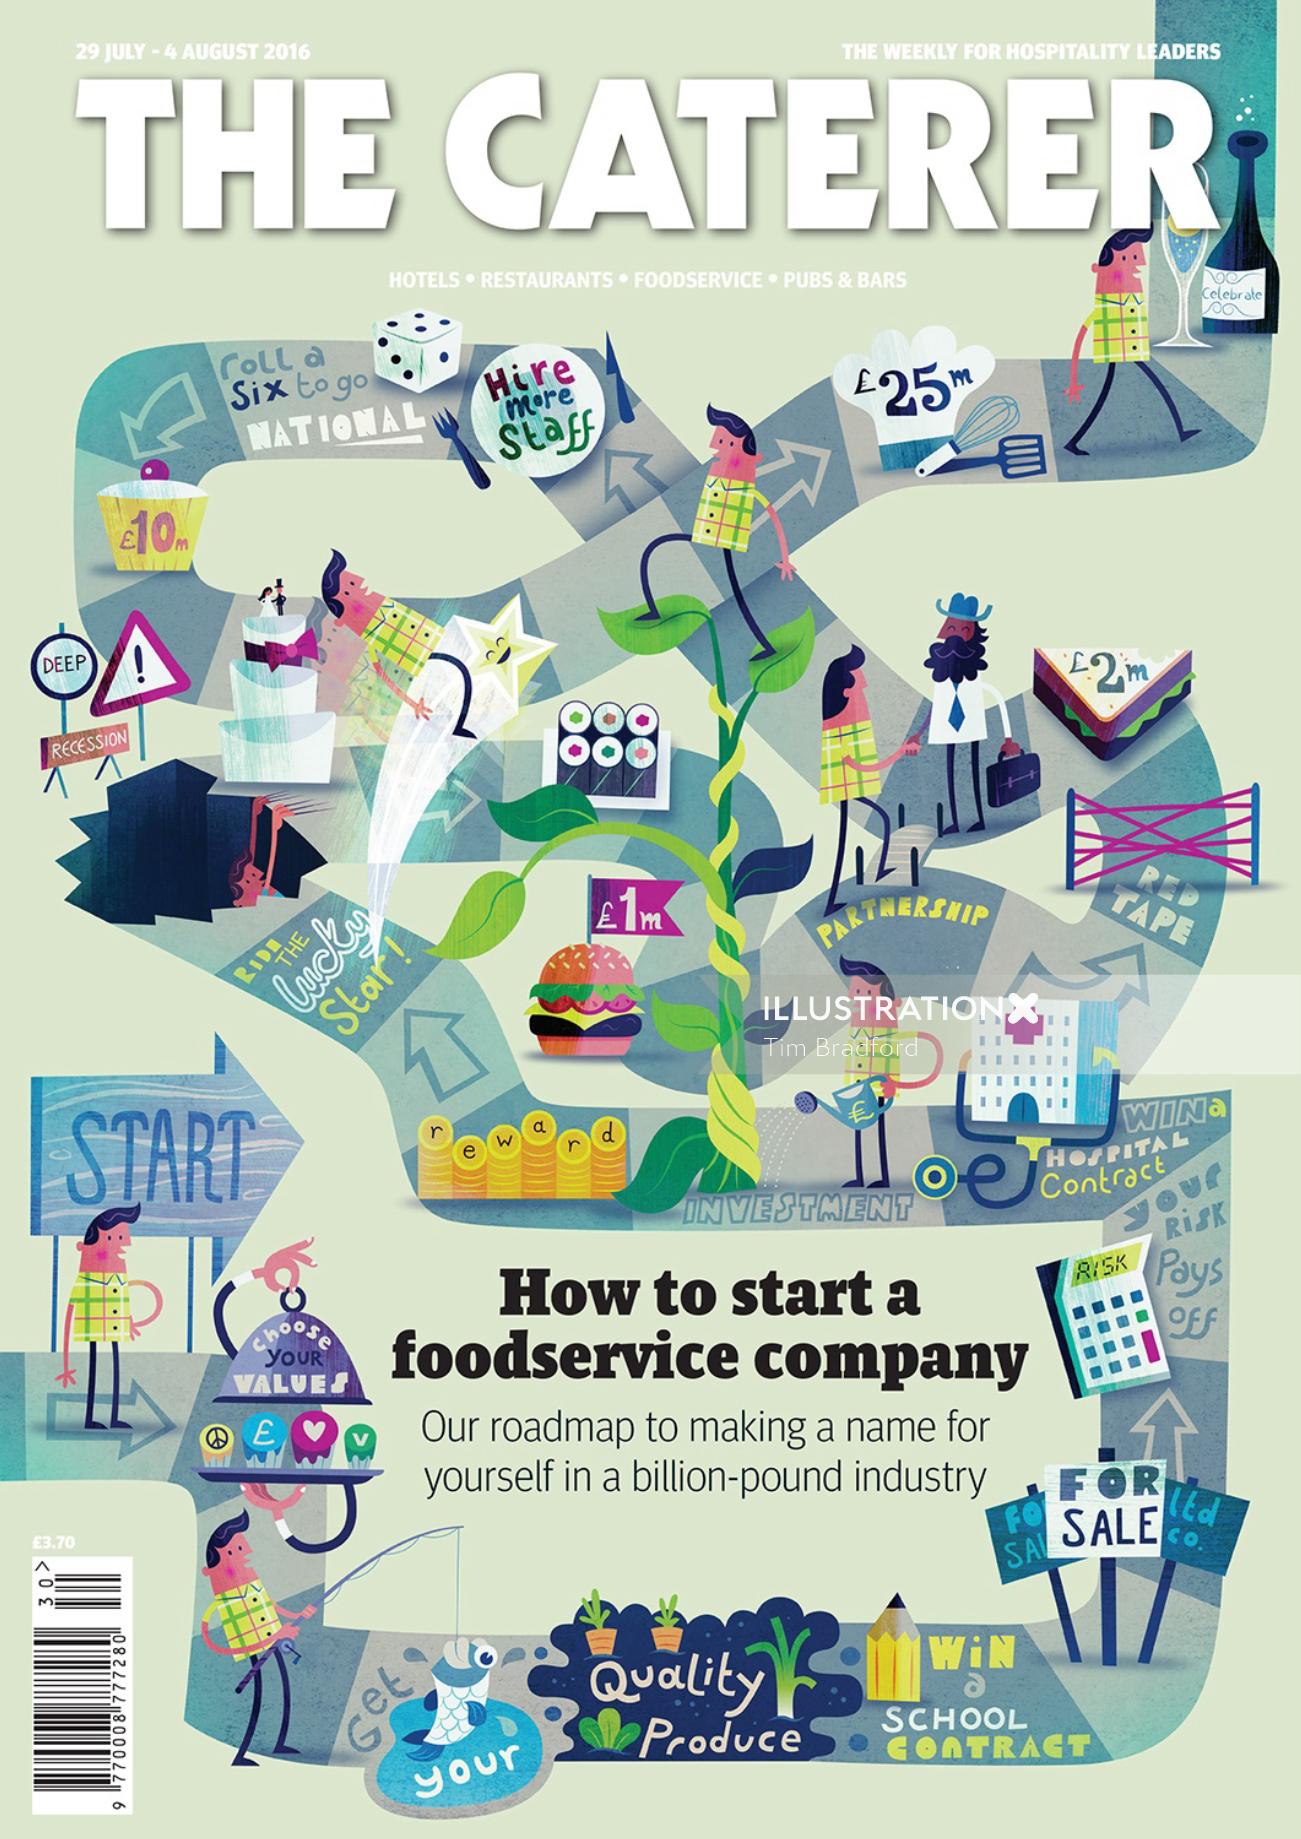 The Caterer Editorial map
illustration 